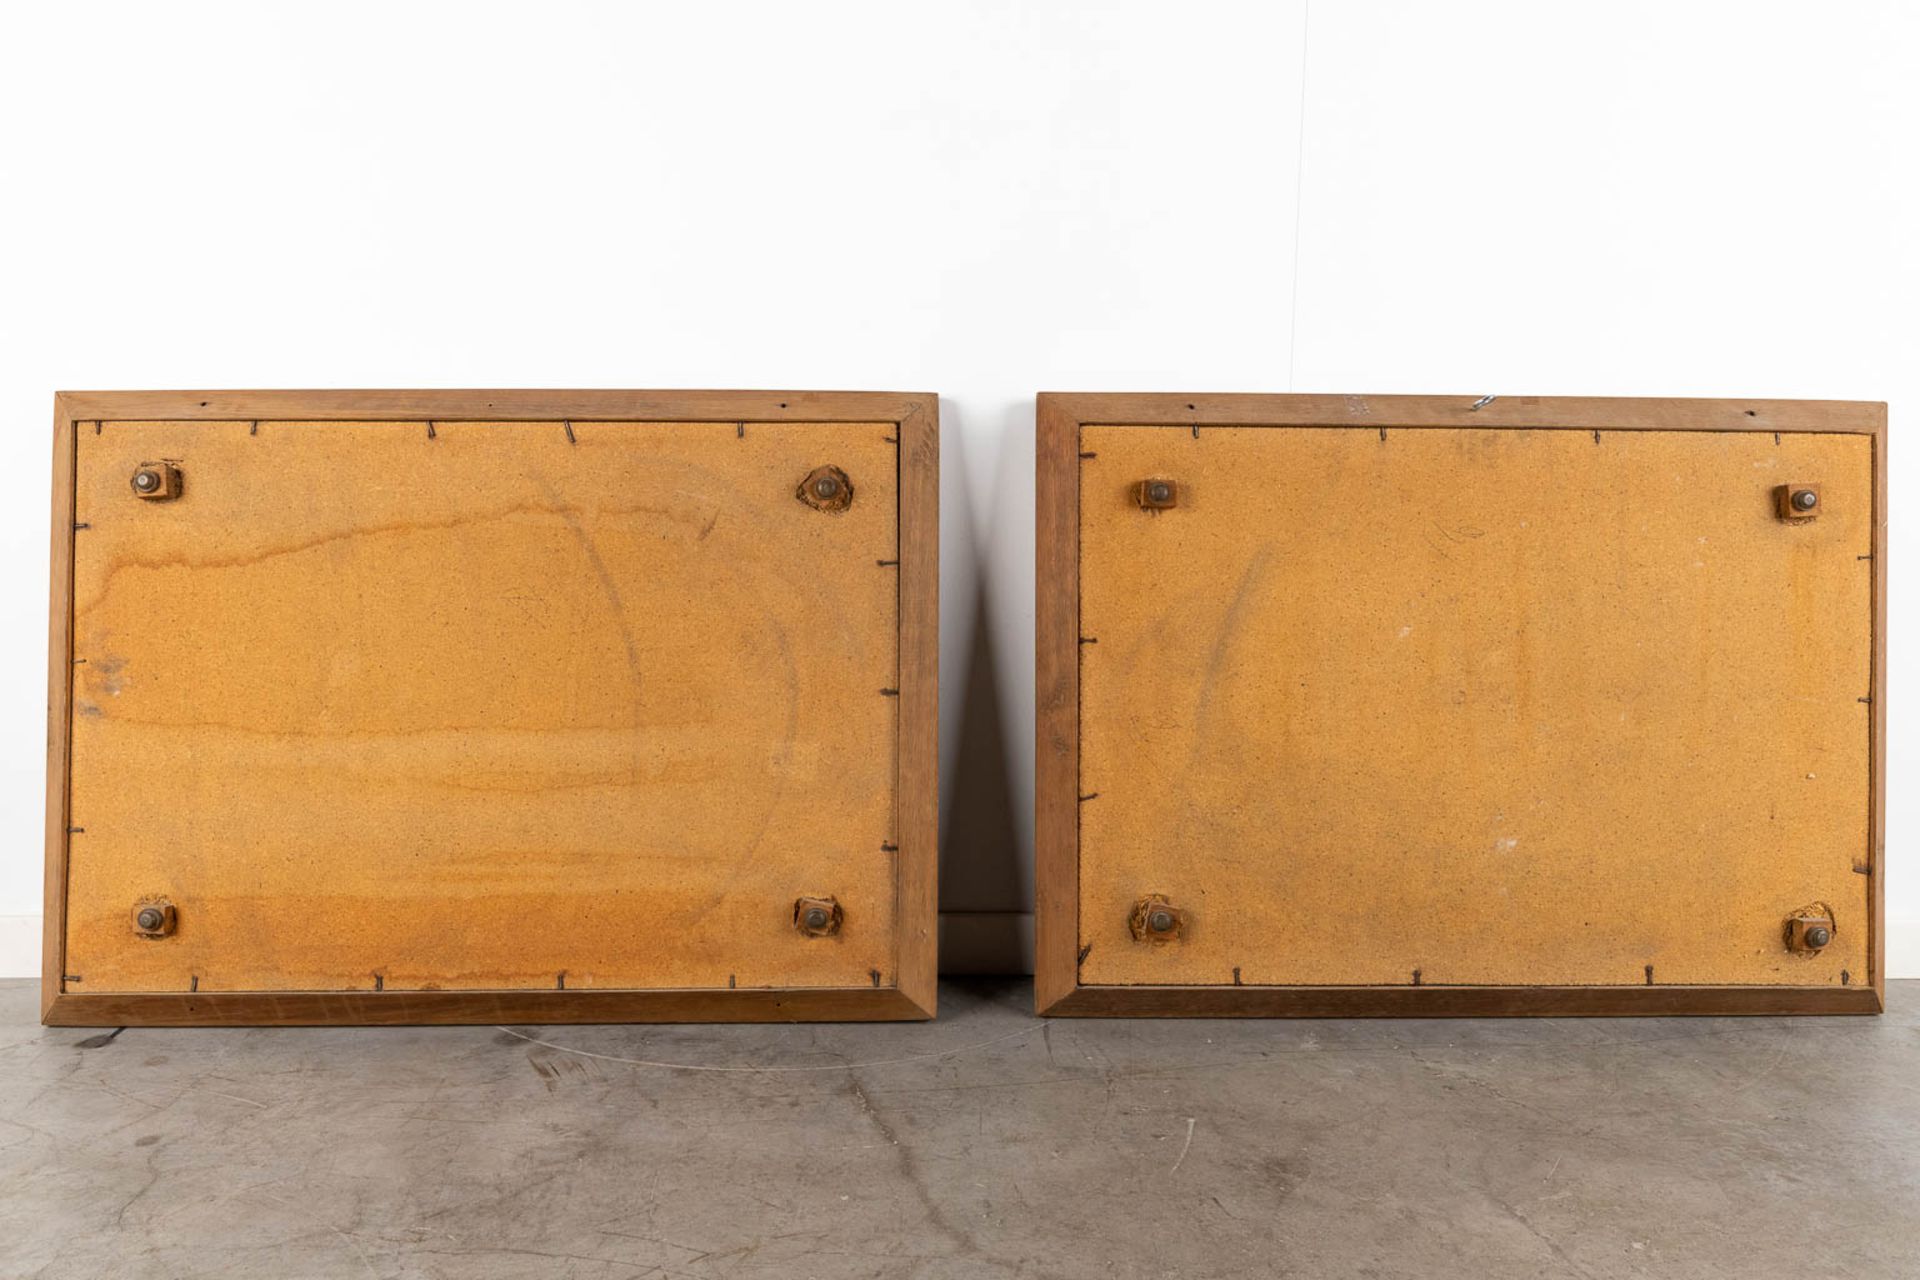 A pair of panels with religious scnes. Circa 1950. (W: 90 x H: 64 cm) - Image 12 of 12